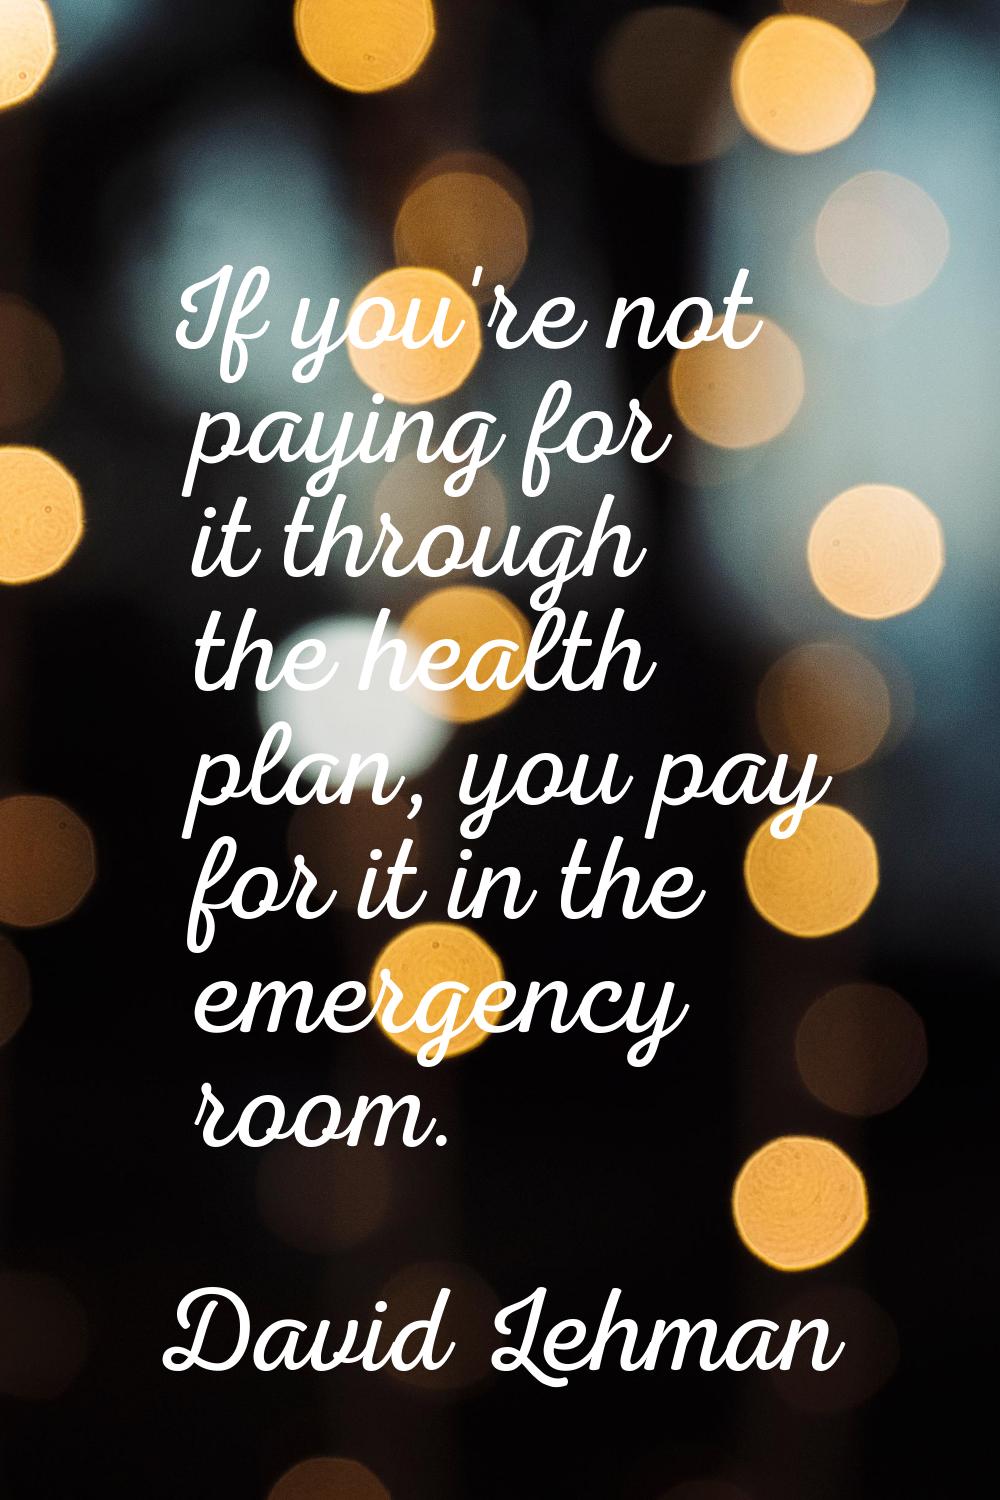 If you're not paying for it through the health plan, you pay for it in the emergency room.